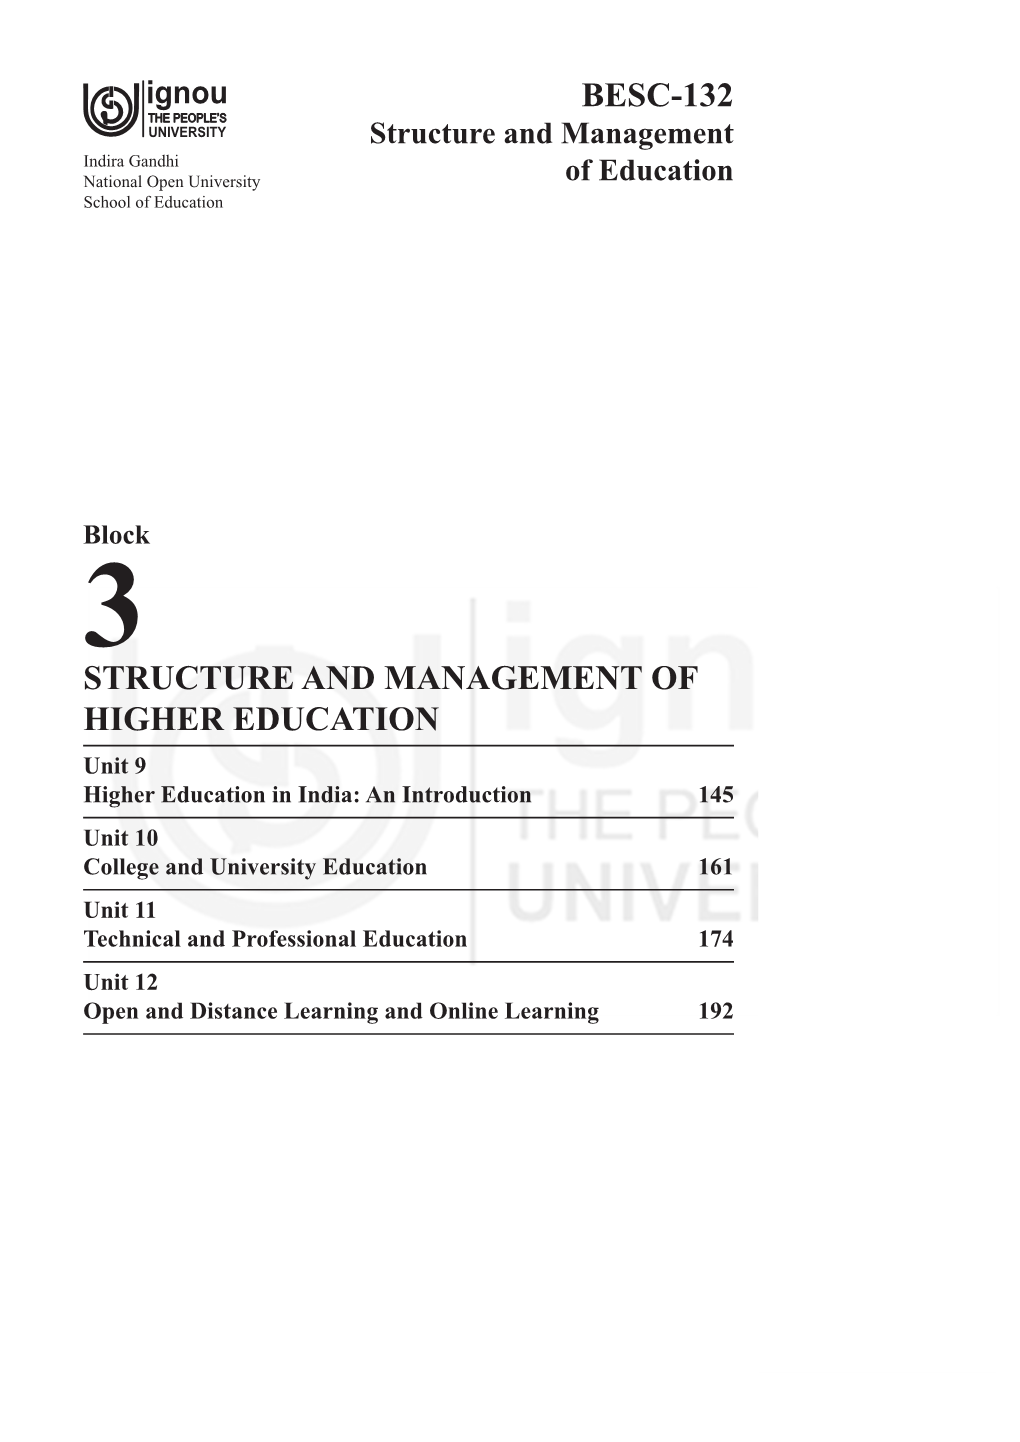 Structure and Management of Higher Education BESC-132